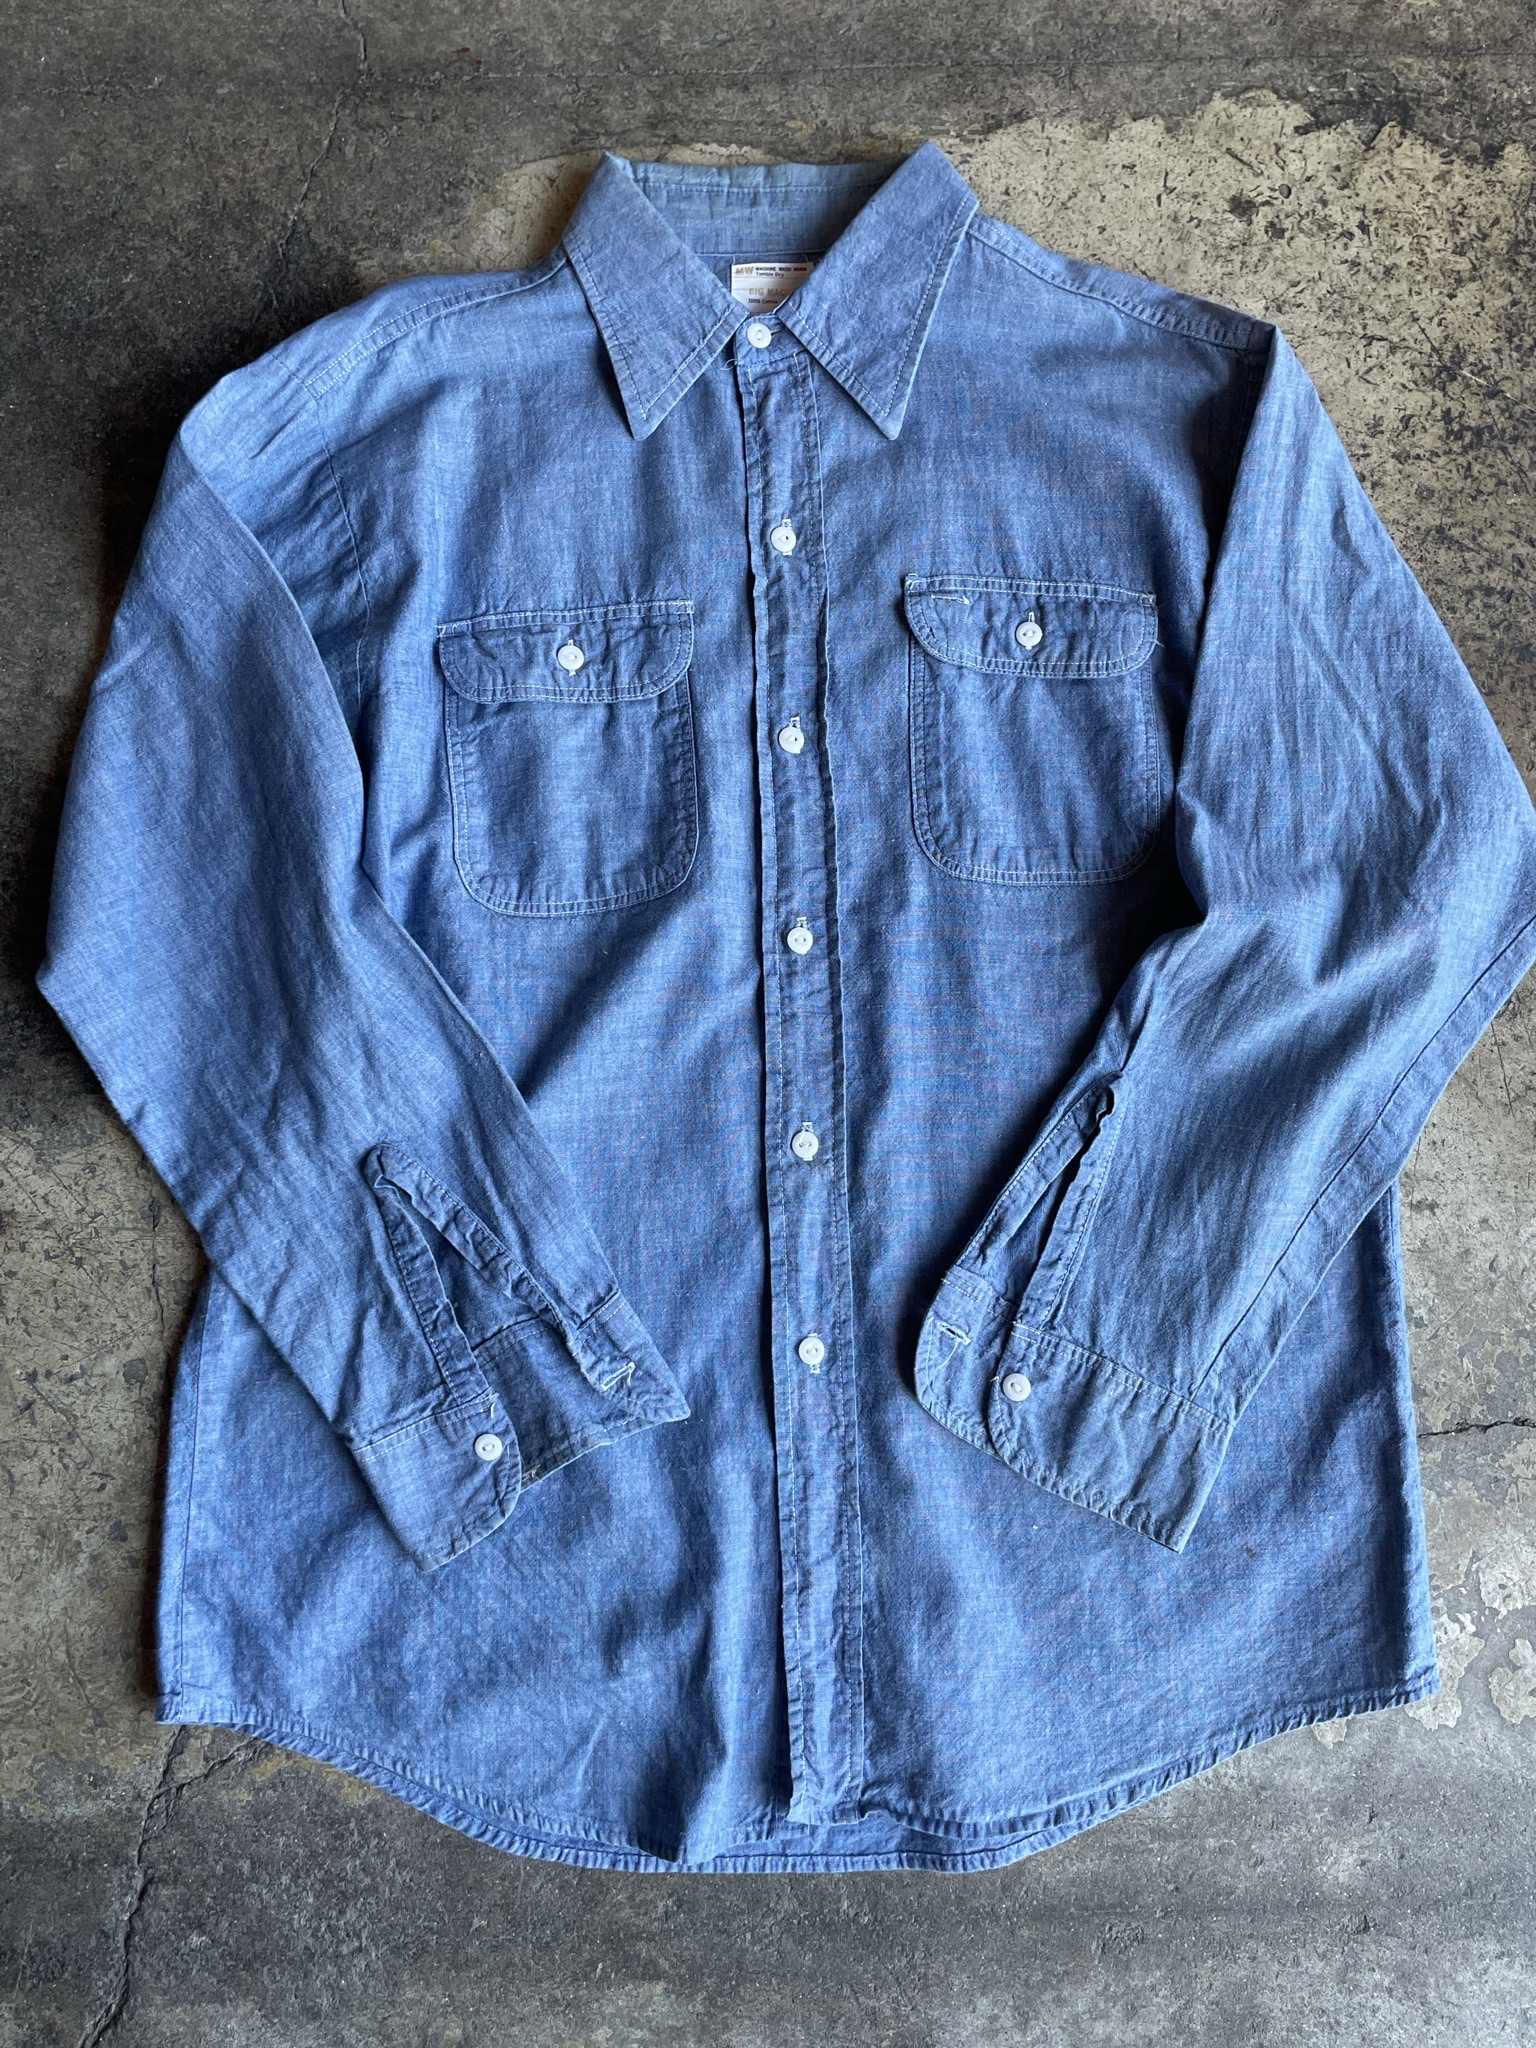 archive special vintage ビッグマック shirt.